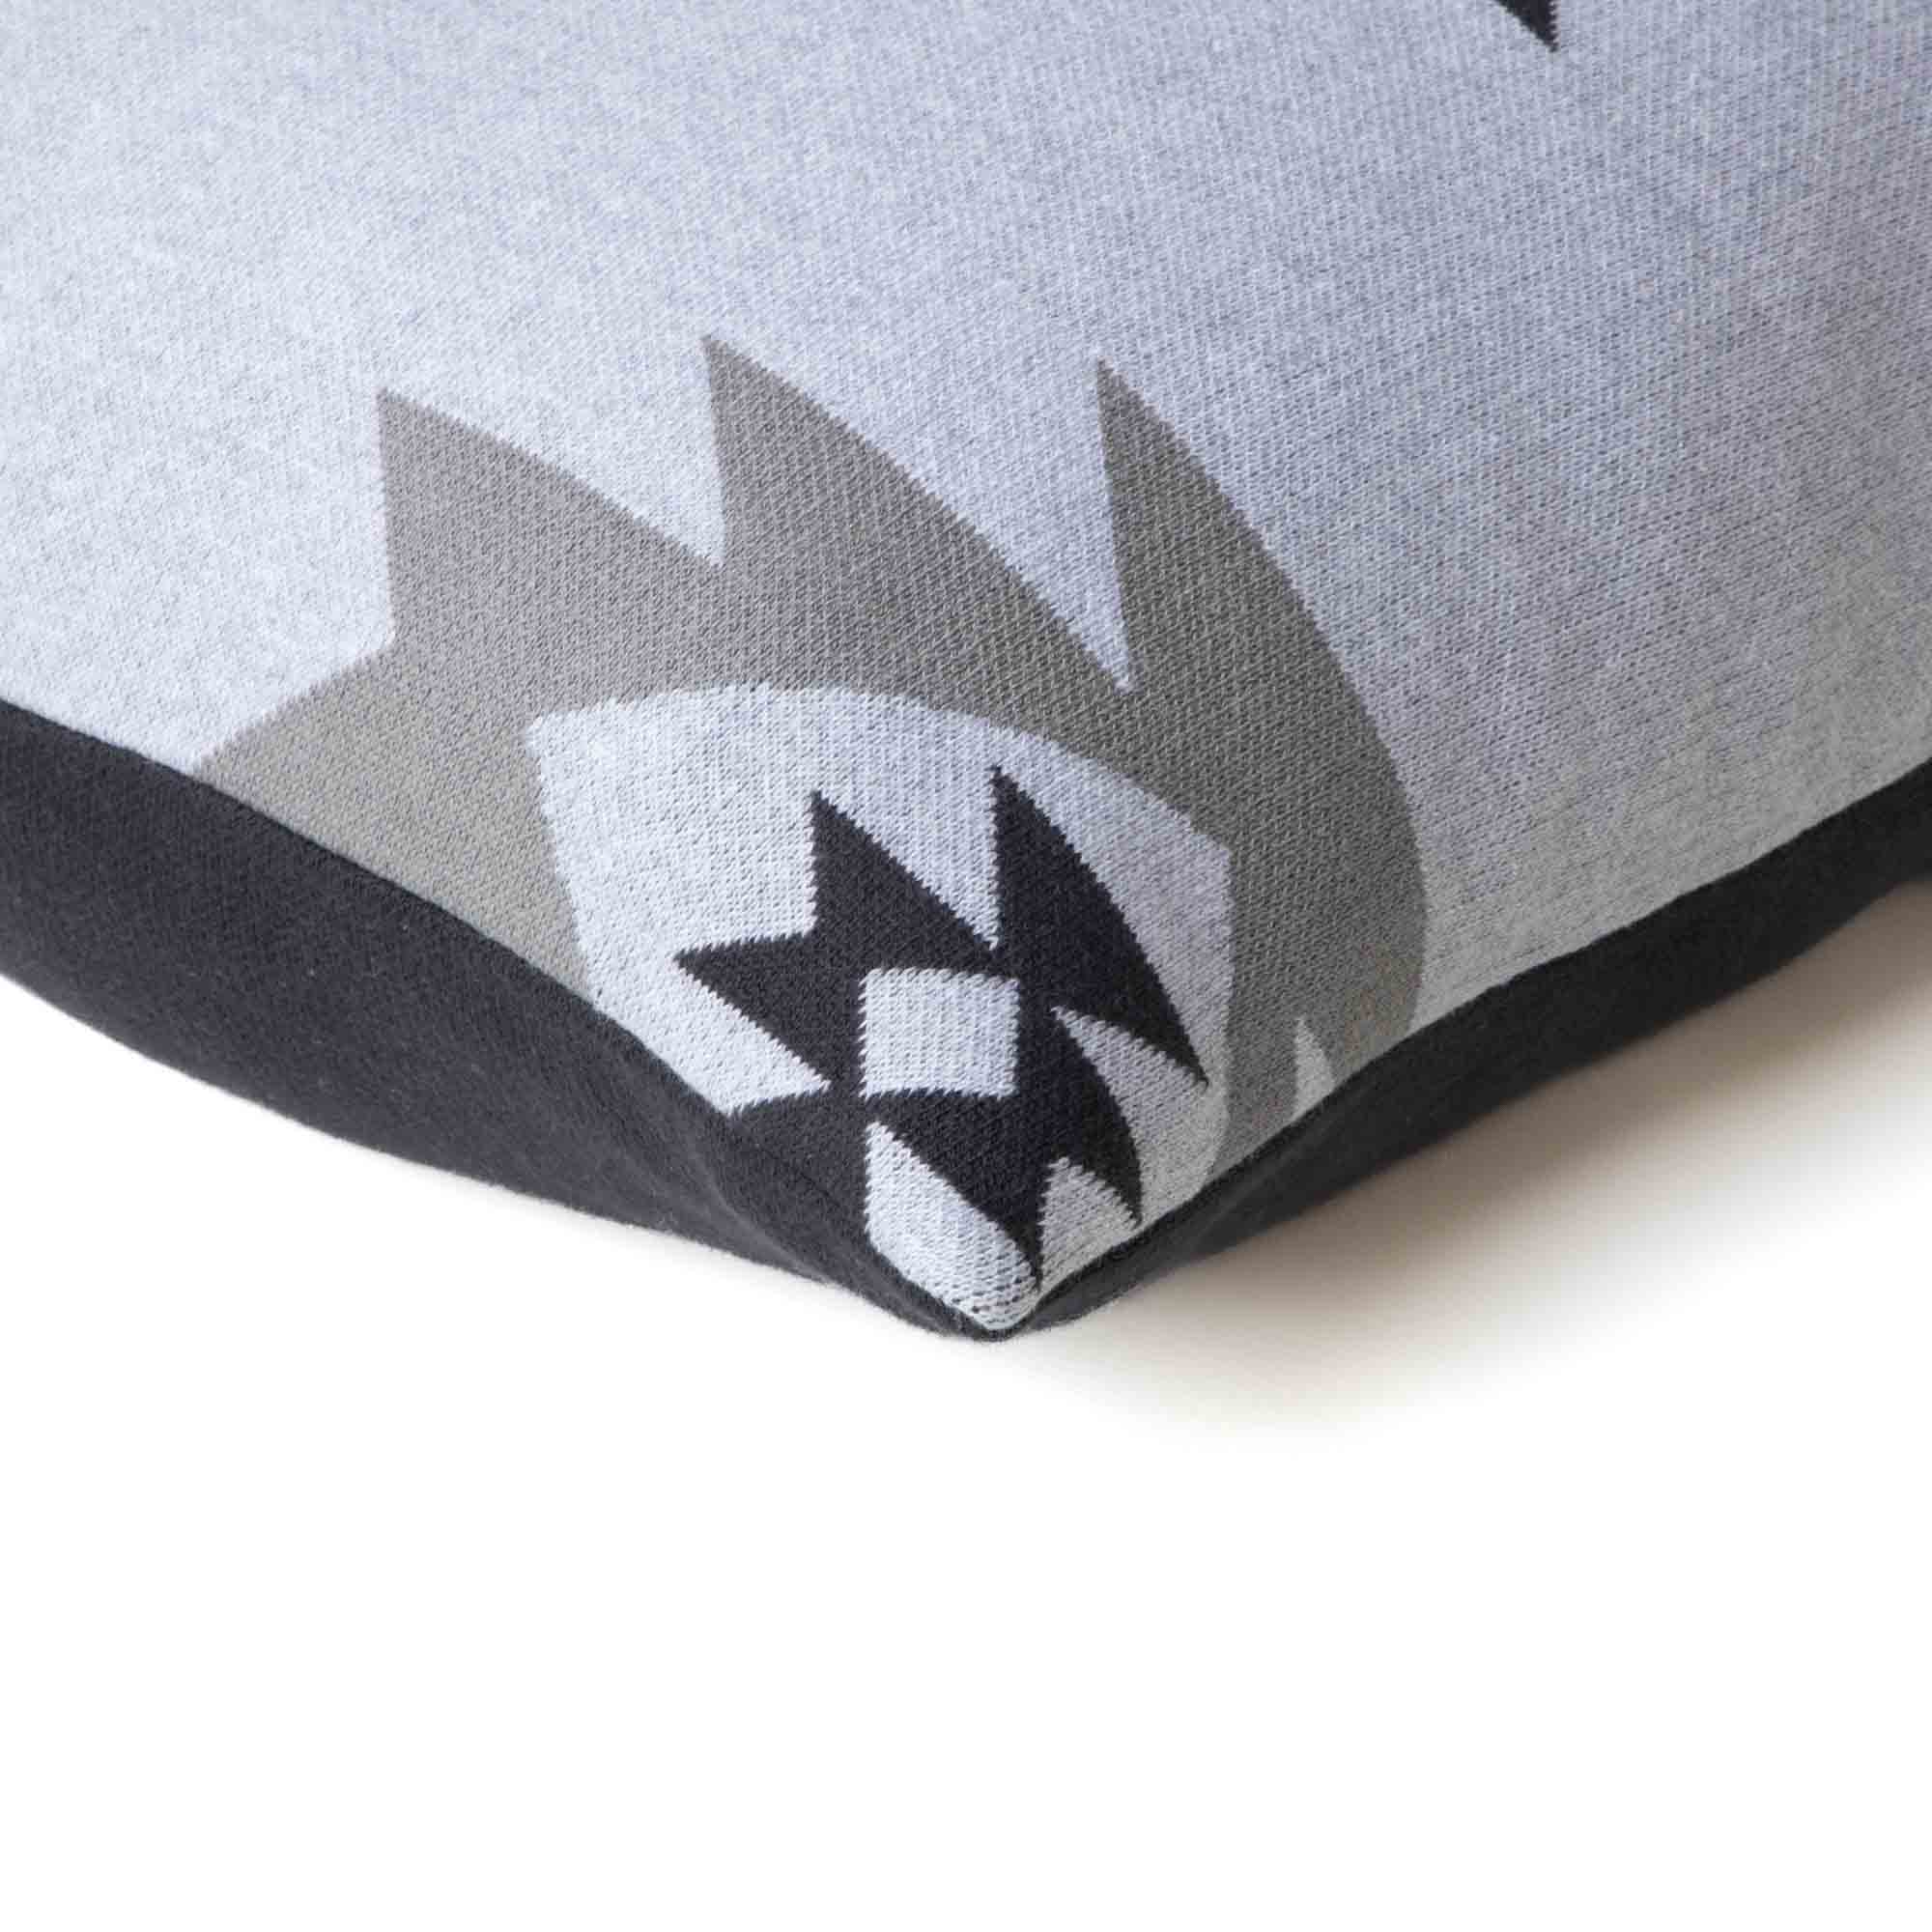 Knight Aztec Cushion Cover